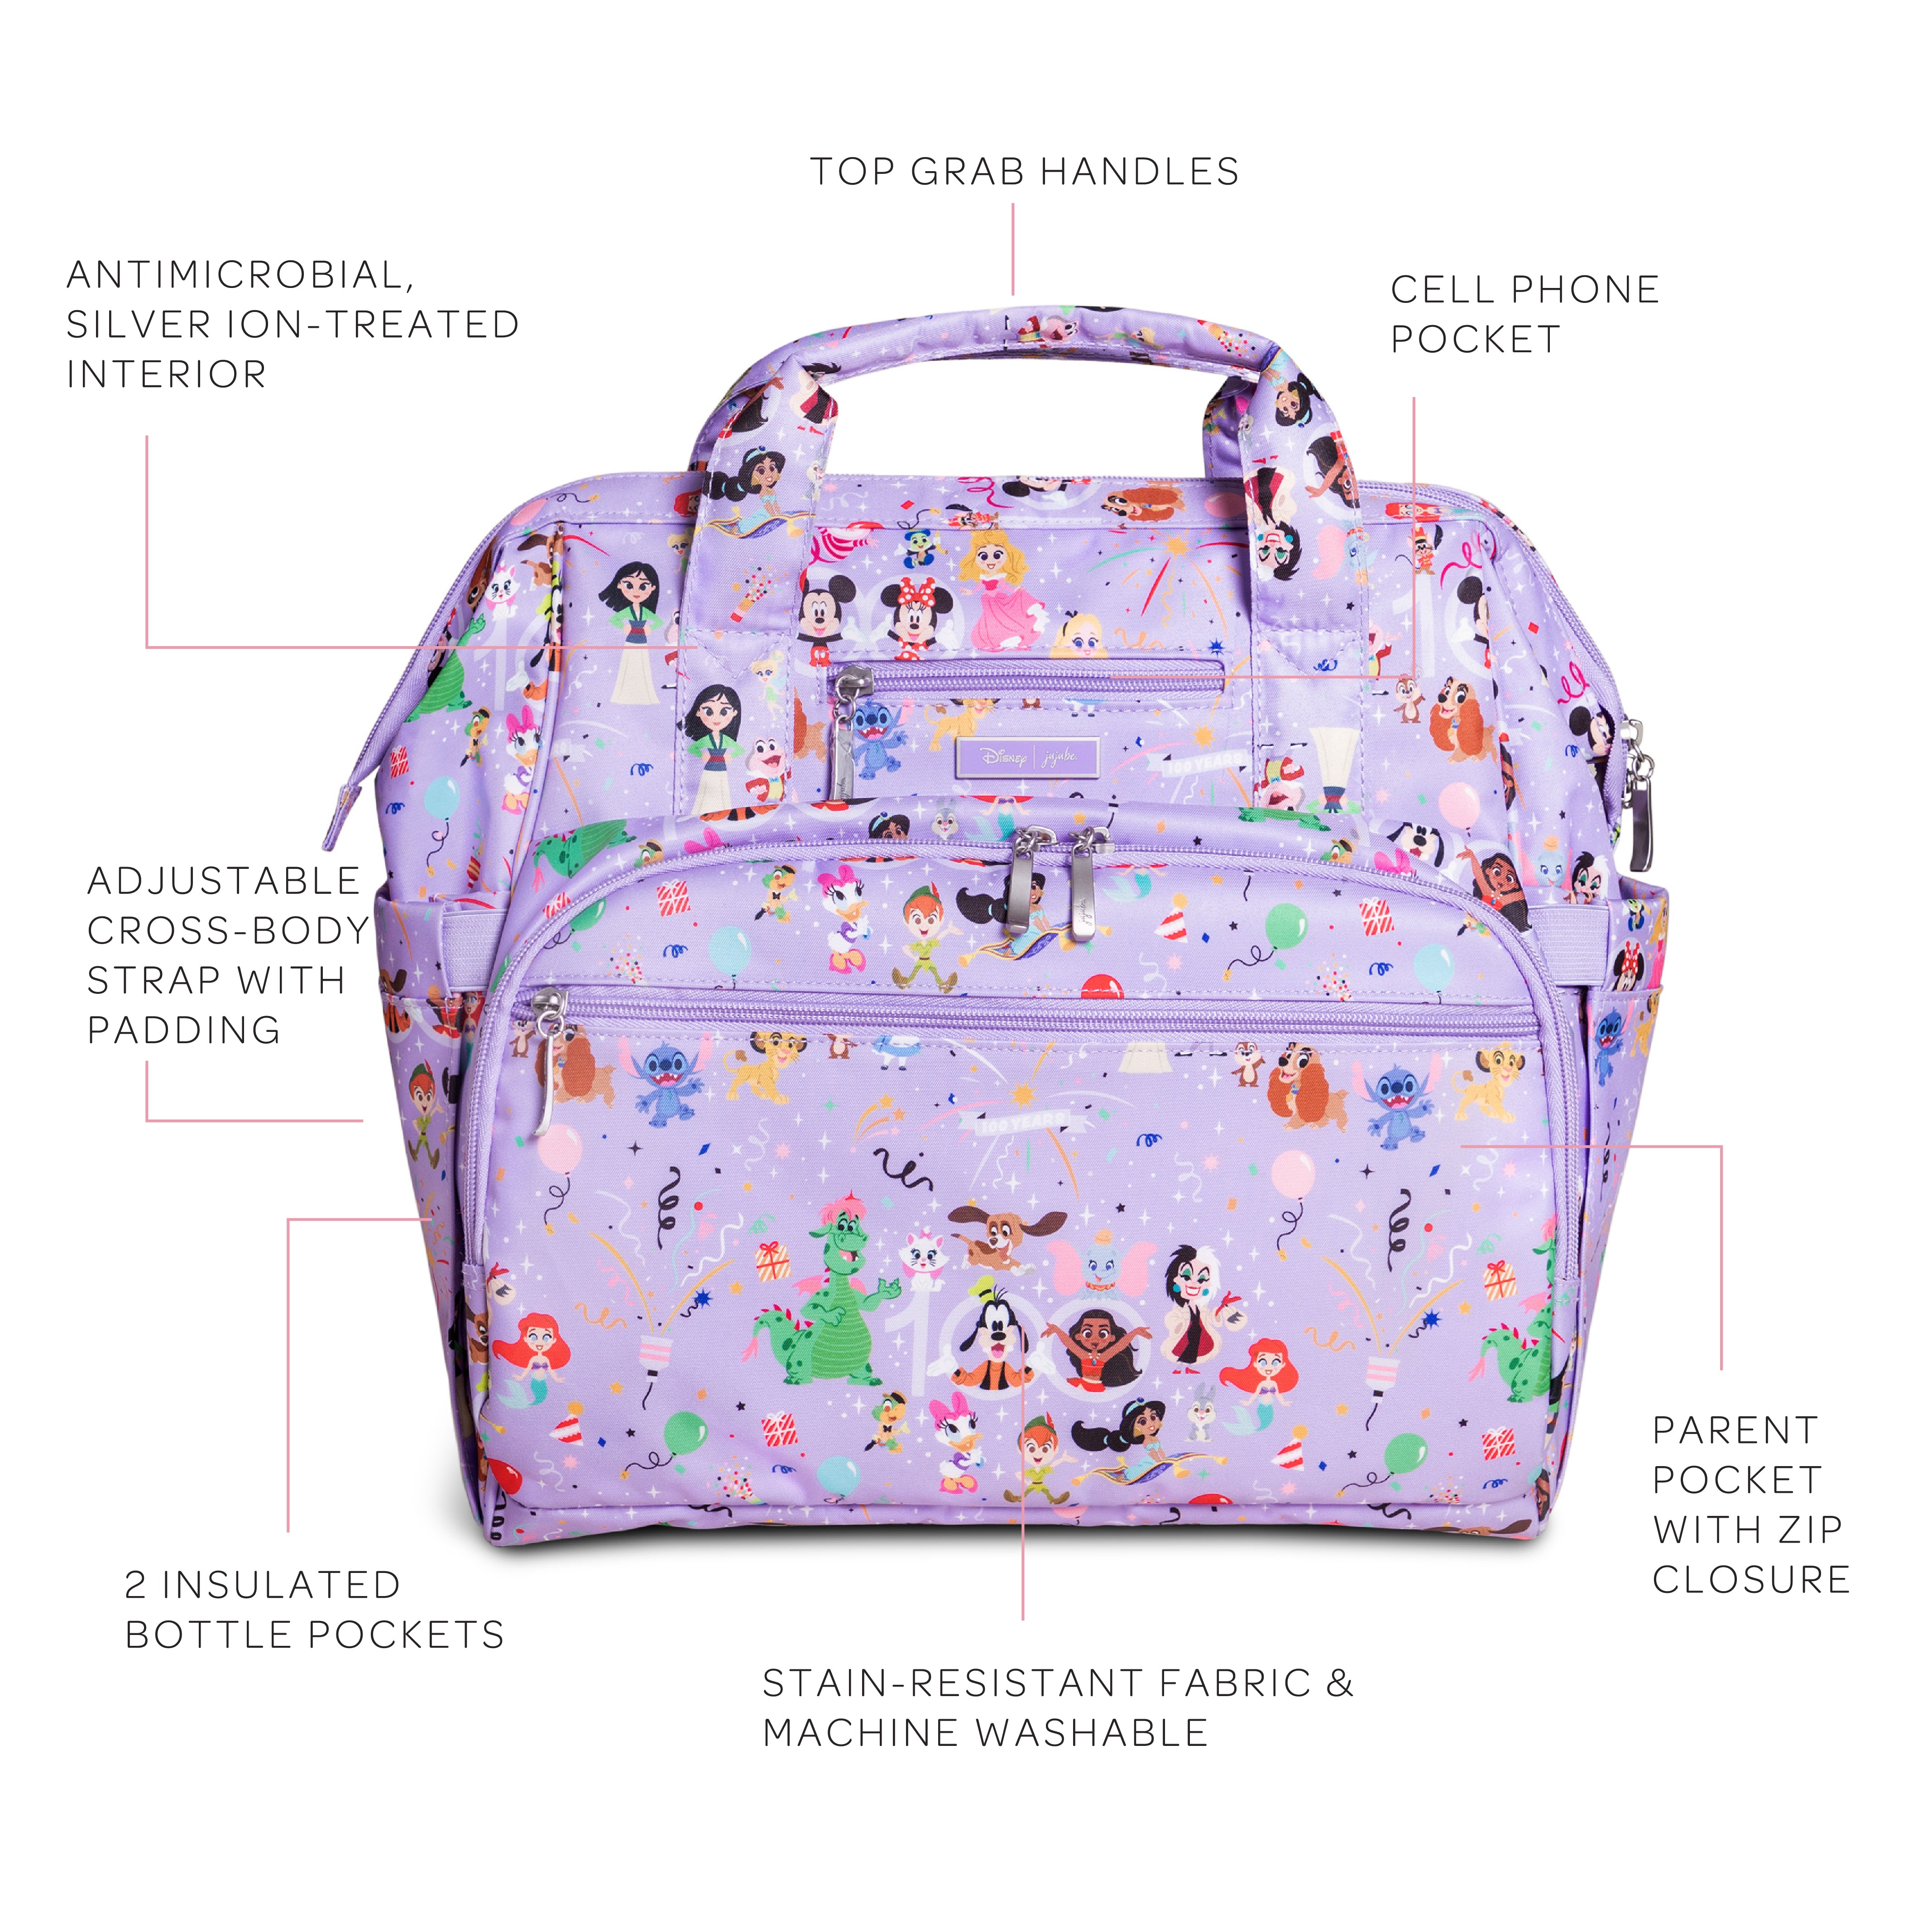 A purple diaper bag with a D100 Disney's Century of Magic print, showcasing beloved Disney characters from the past century. The design pays homage to Disney's rich history, encompassing a variety of iconic characters that have captured the hearts of audiences over the last 100 years.